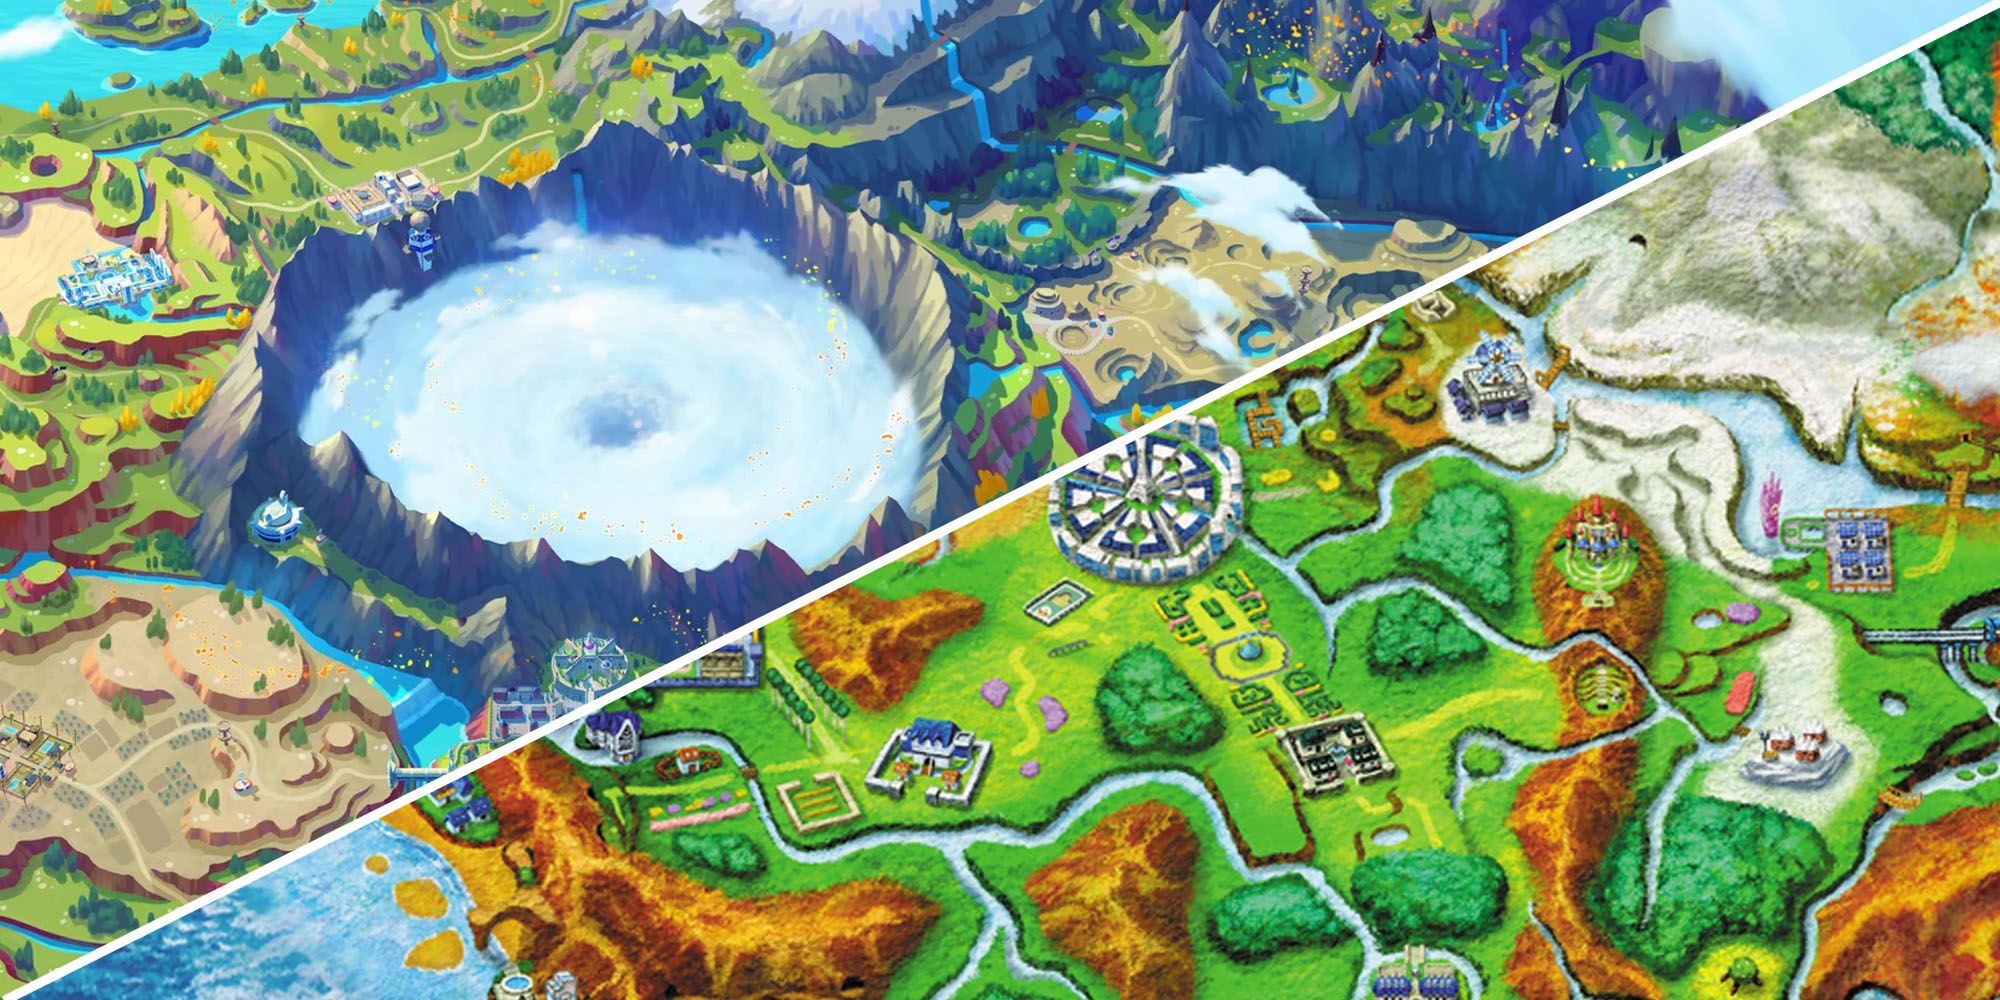 Official artwork of the Pokemon region maps of Paldea and Kalos 